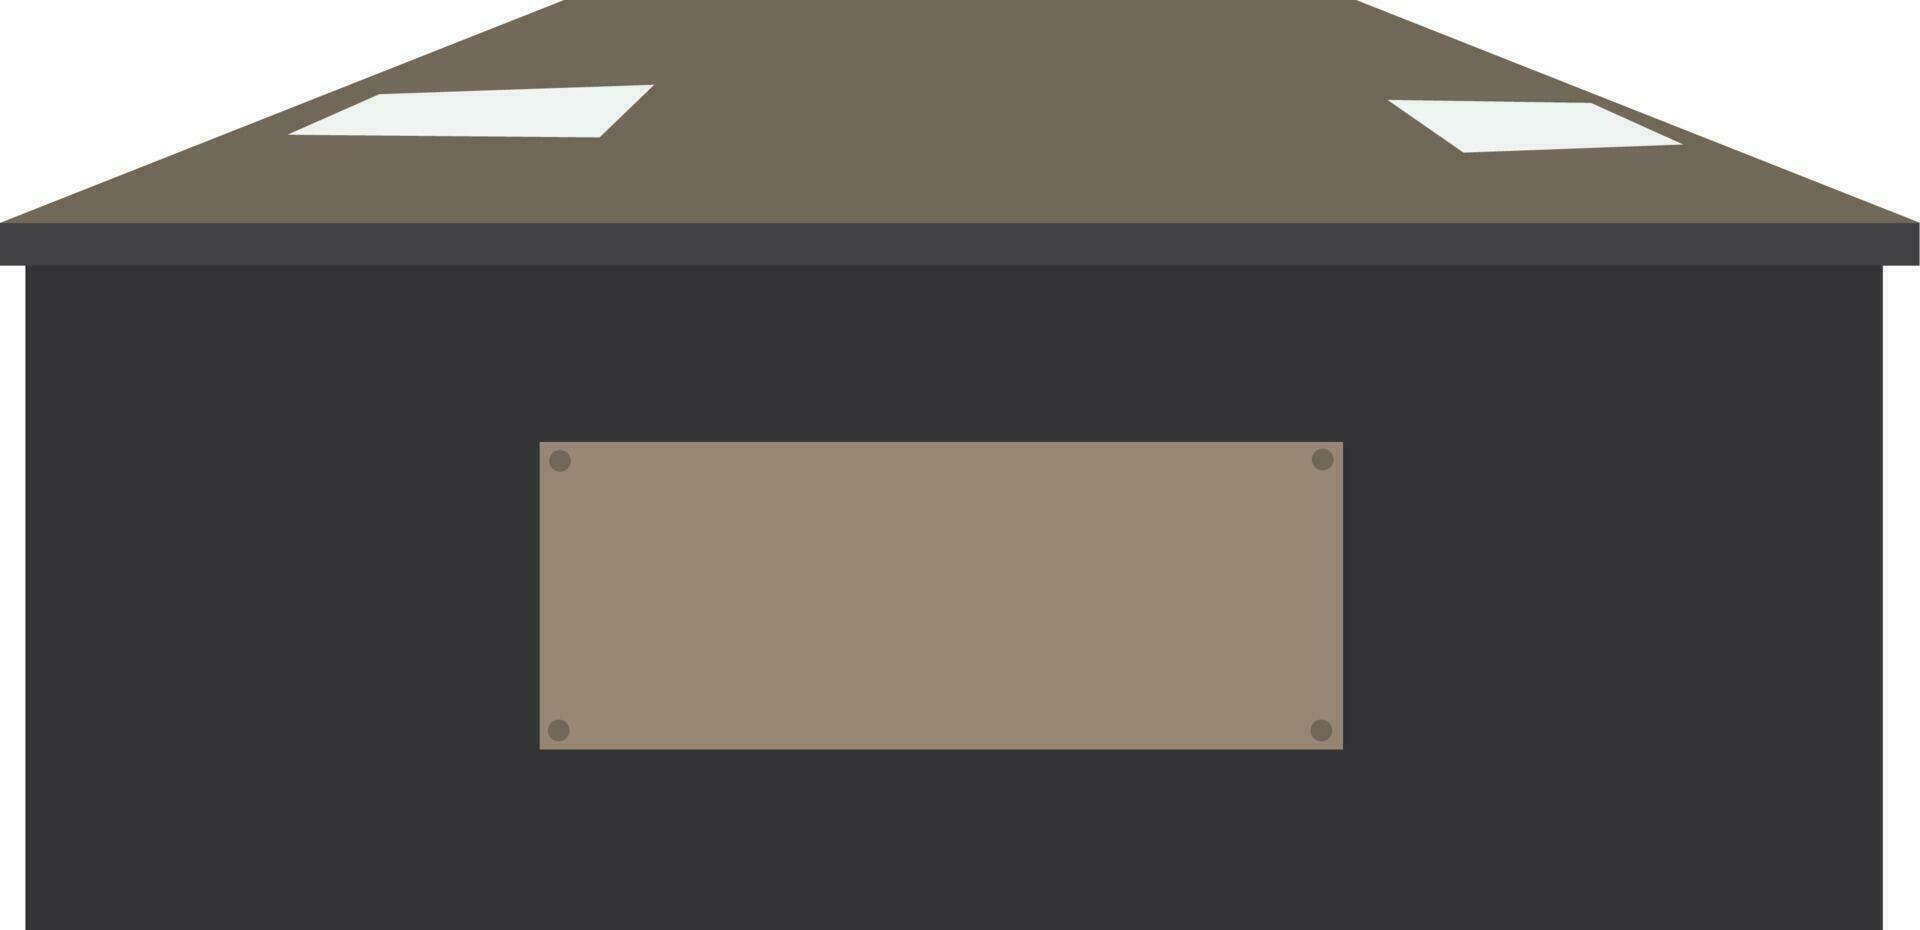 Wooden desk icon in flat style. vector